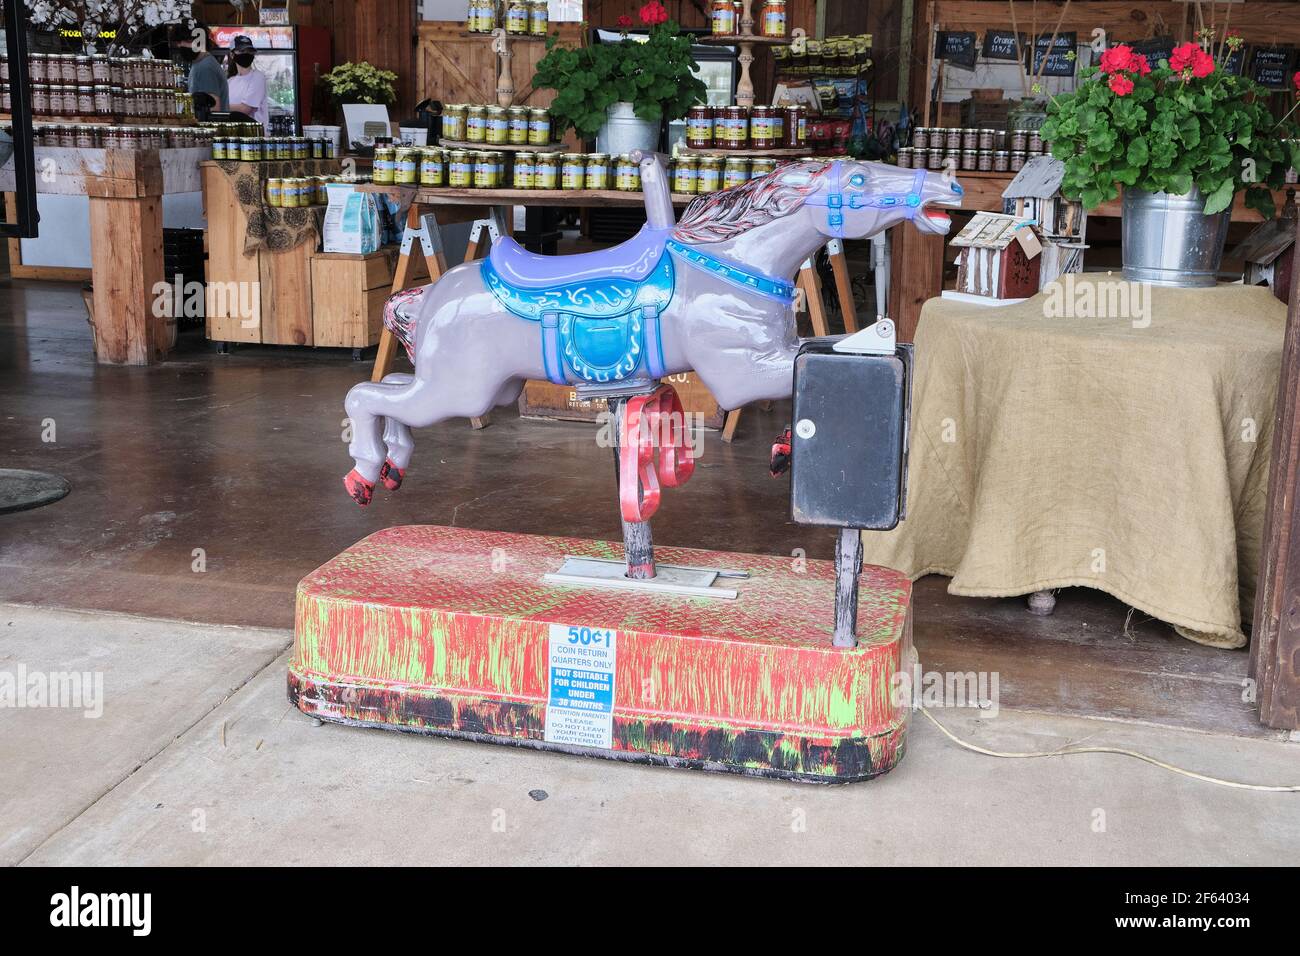 Electric hobby horse amusement ride for children at a country store in Pike Road Alabama, USA. Stock Photo